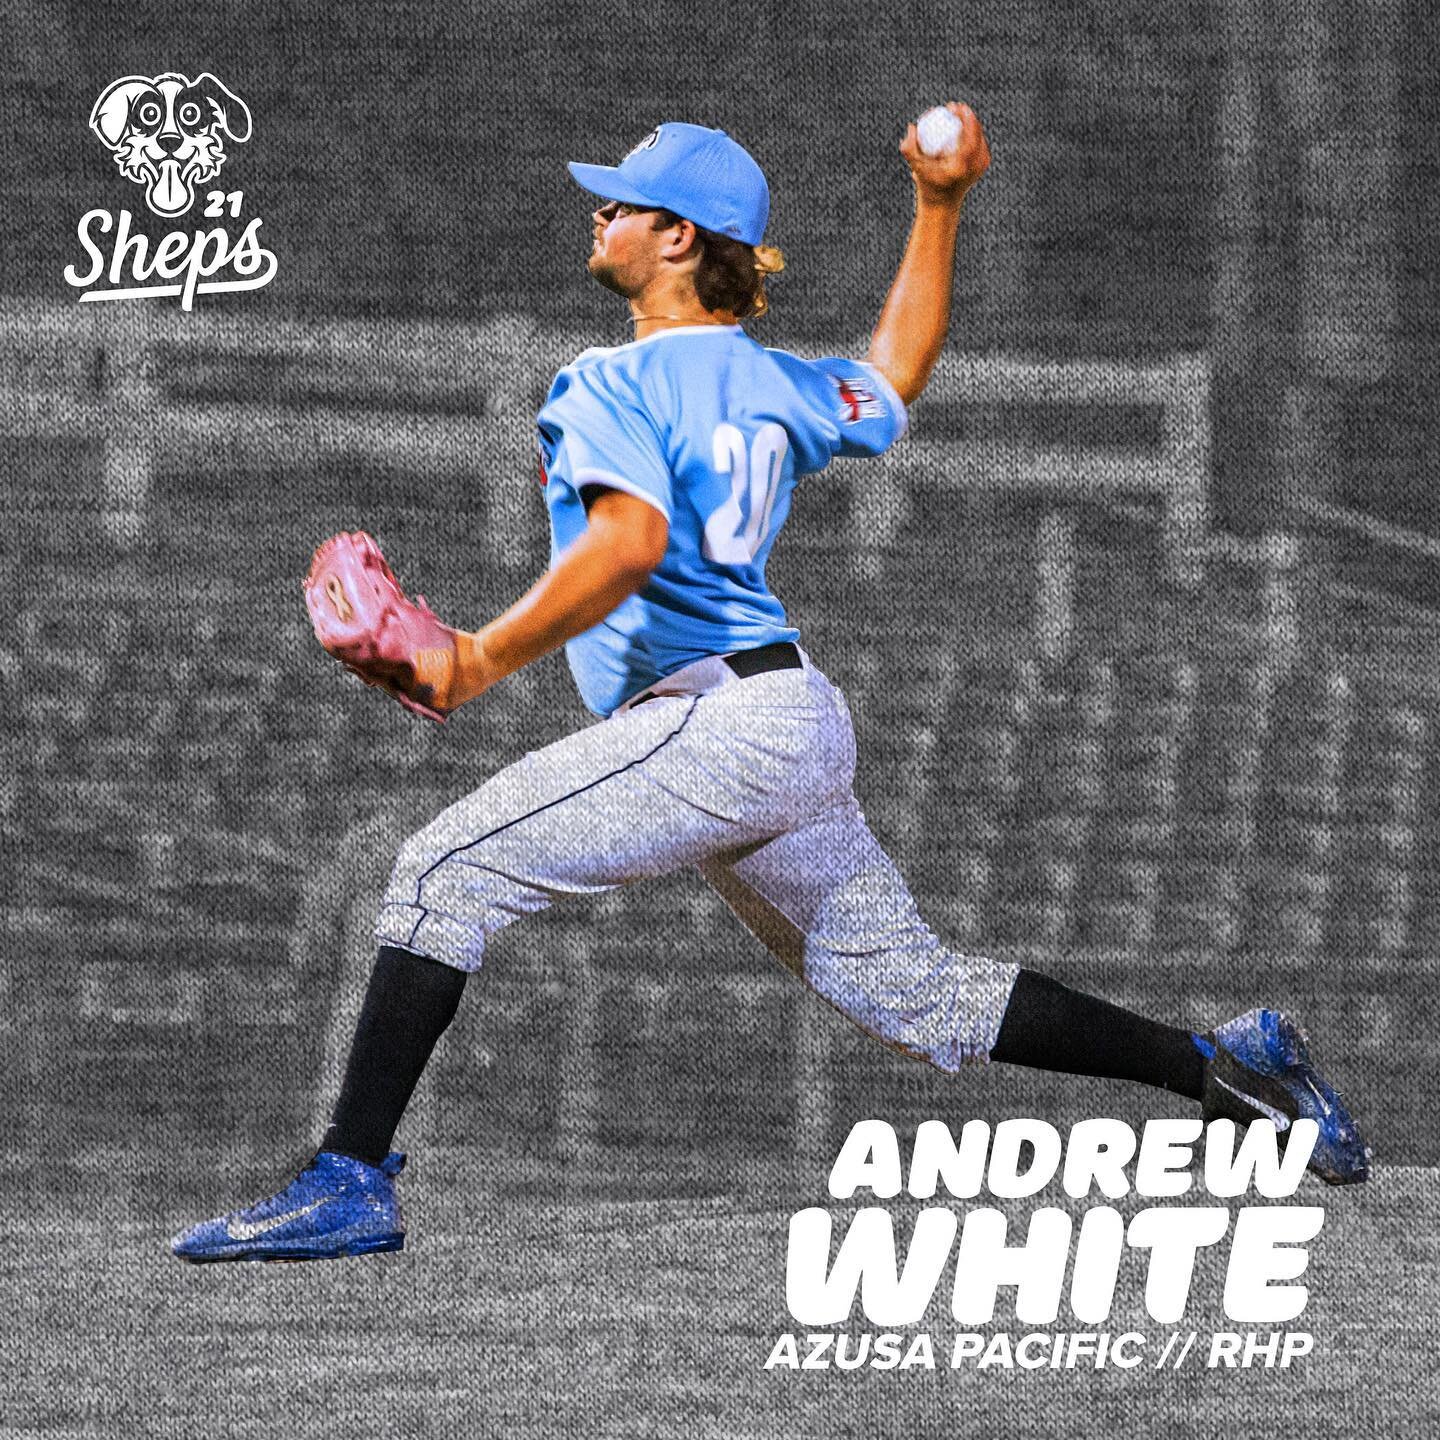 @a.c.white5 coming back again for another great summer with the Sheps! Stoked to have him back out here as he embodies what it means to be a Shepherd! #goDawgs #Sheps21